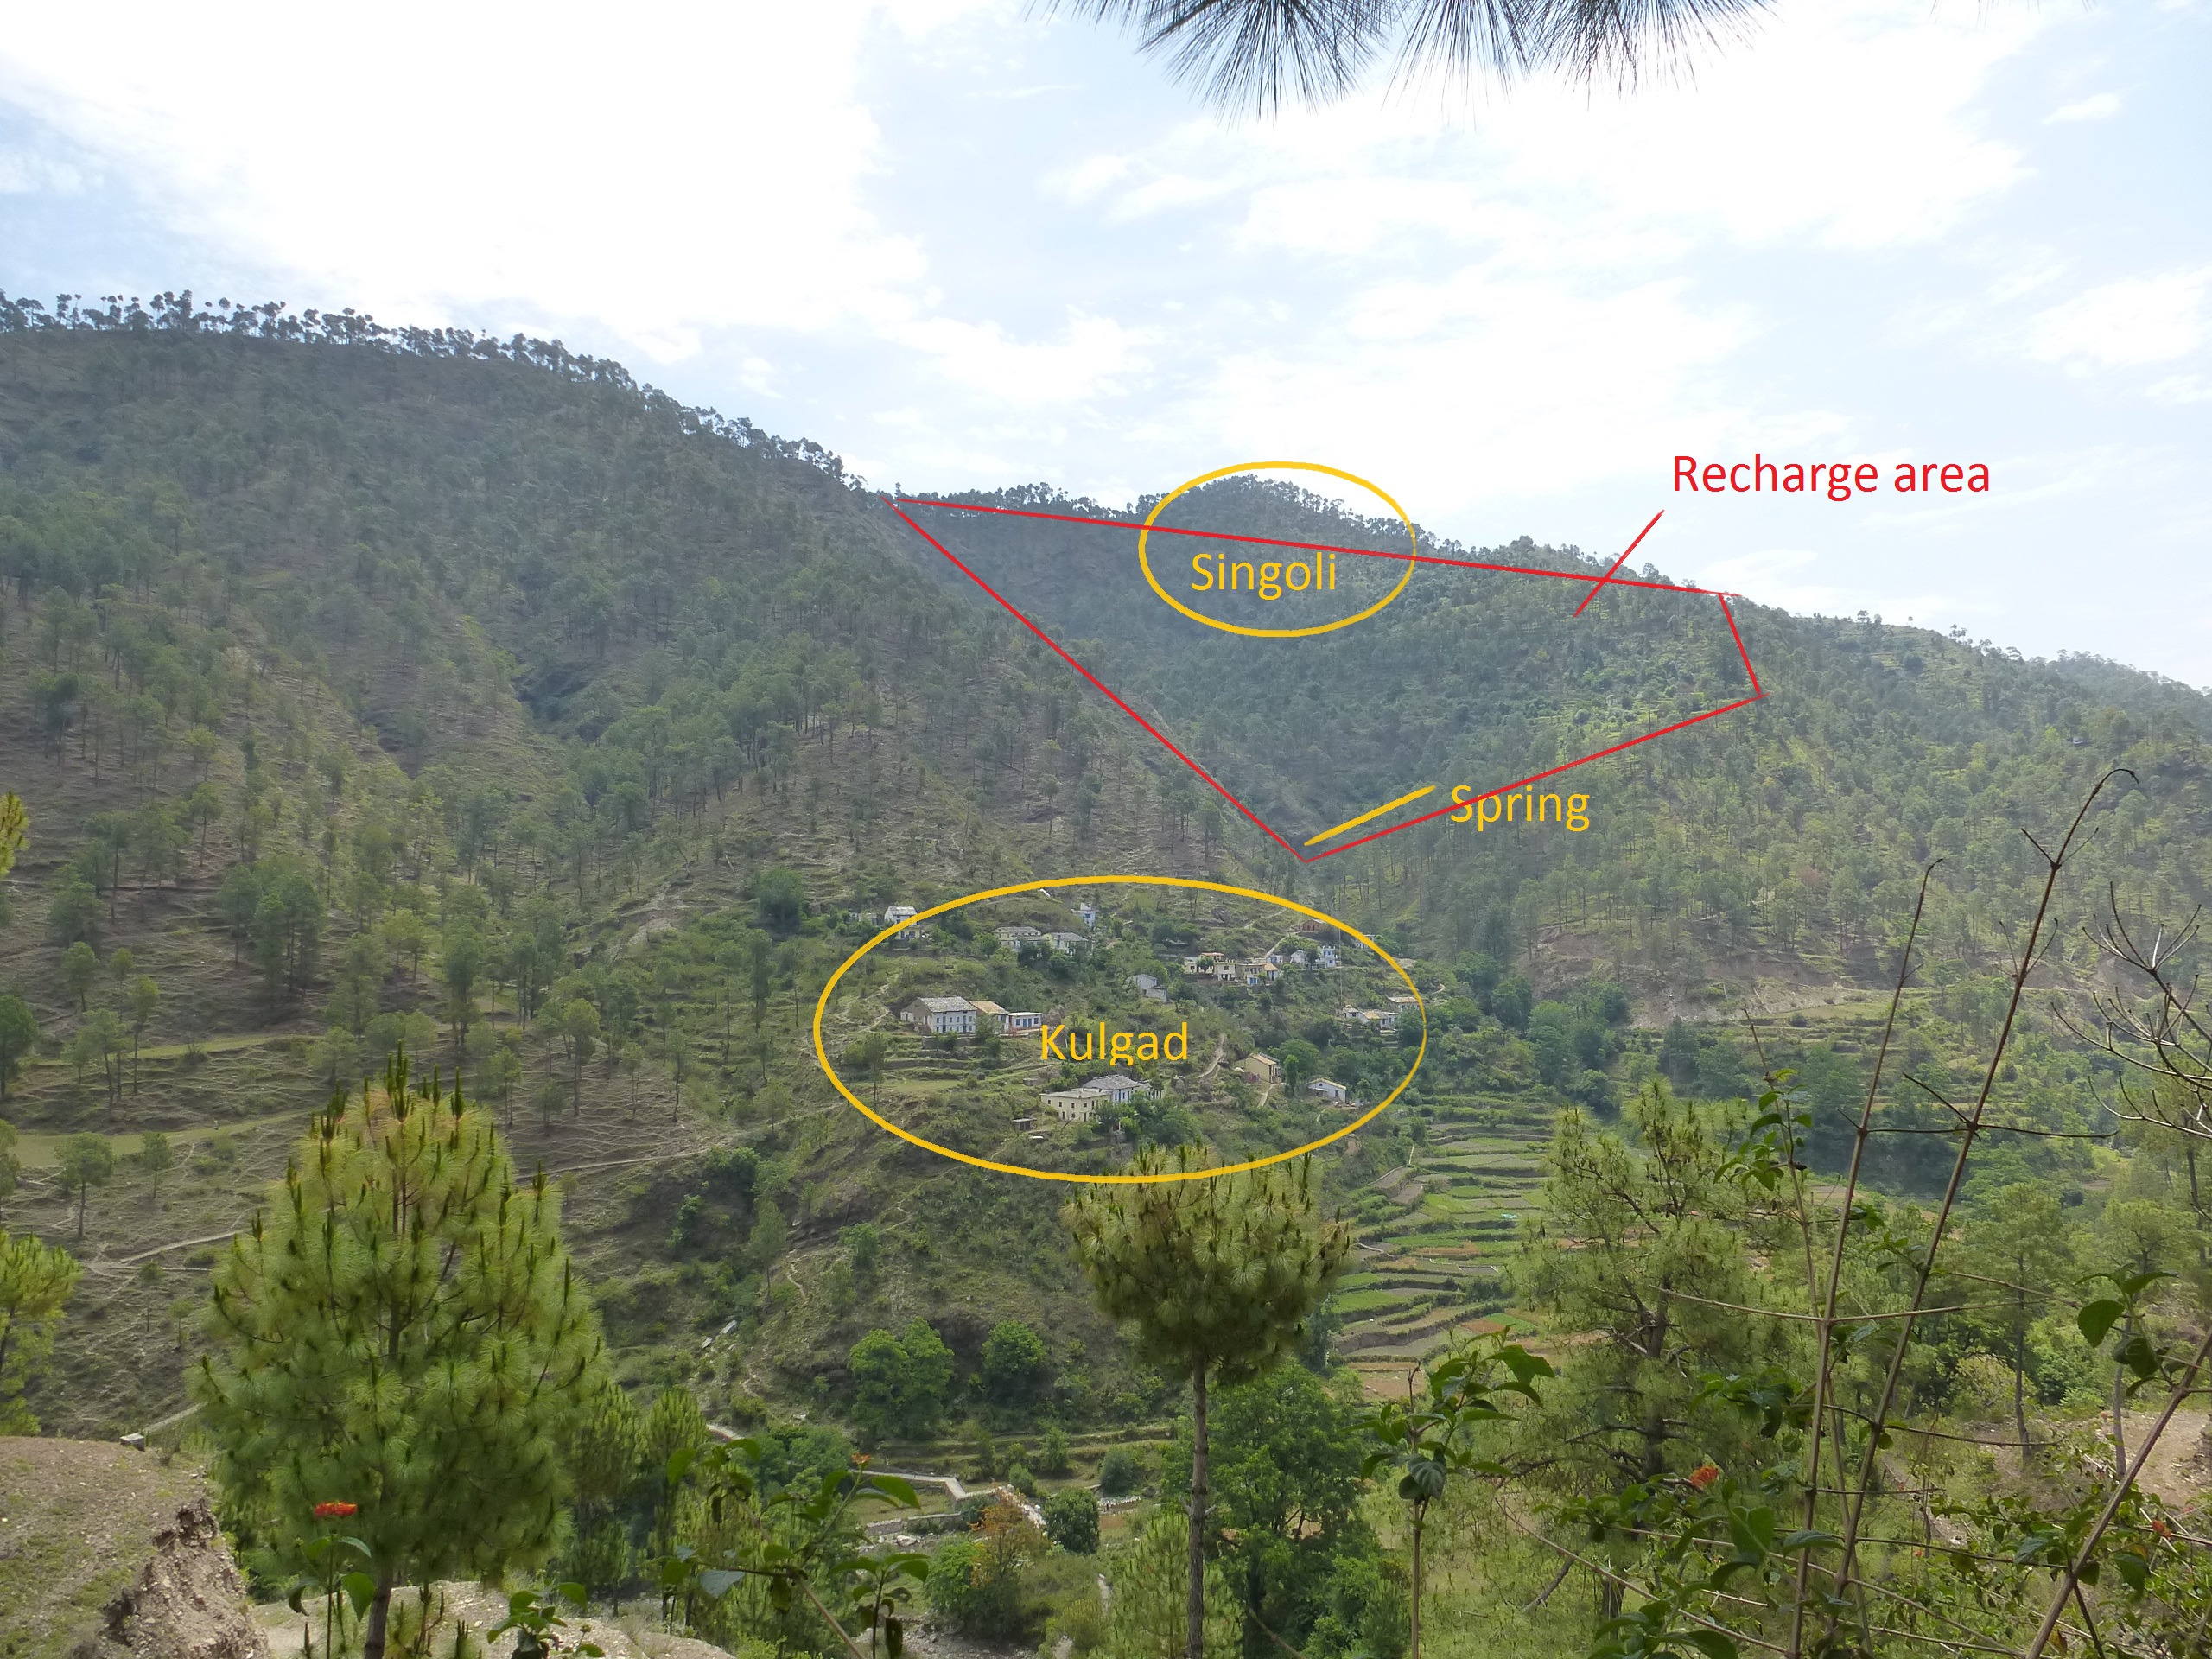 A view of Kulgad and Singoli, with the recharge areas marked out.